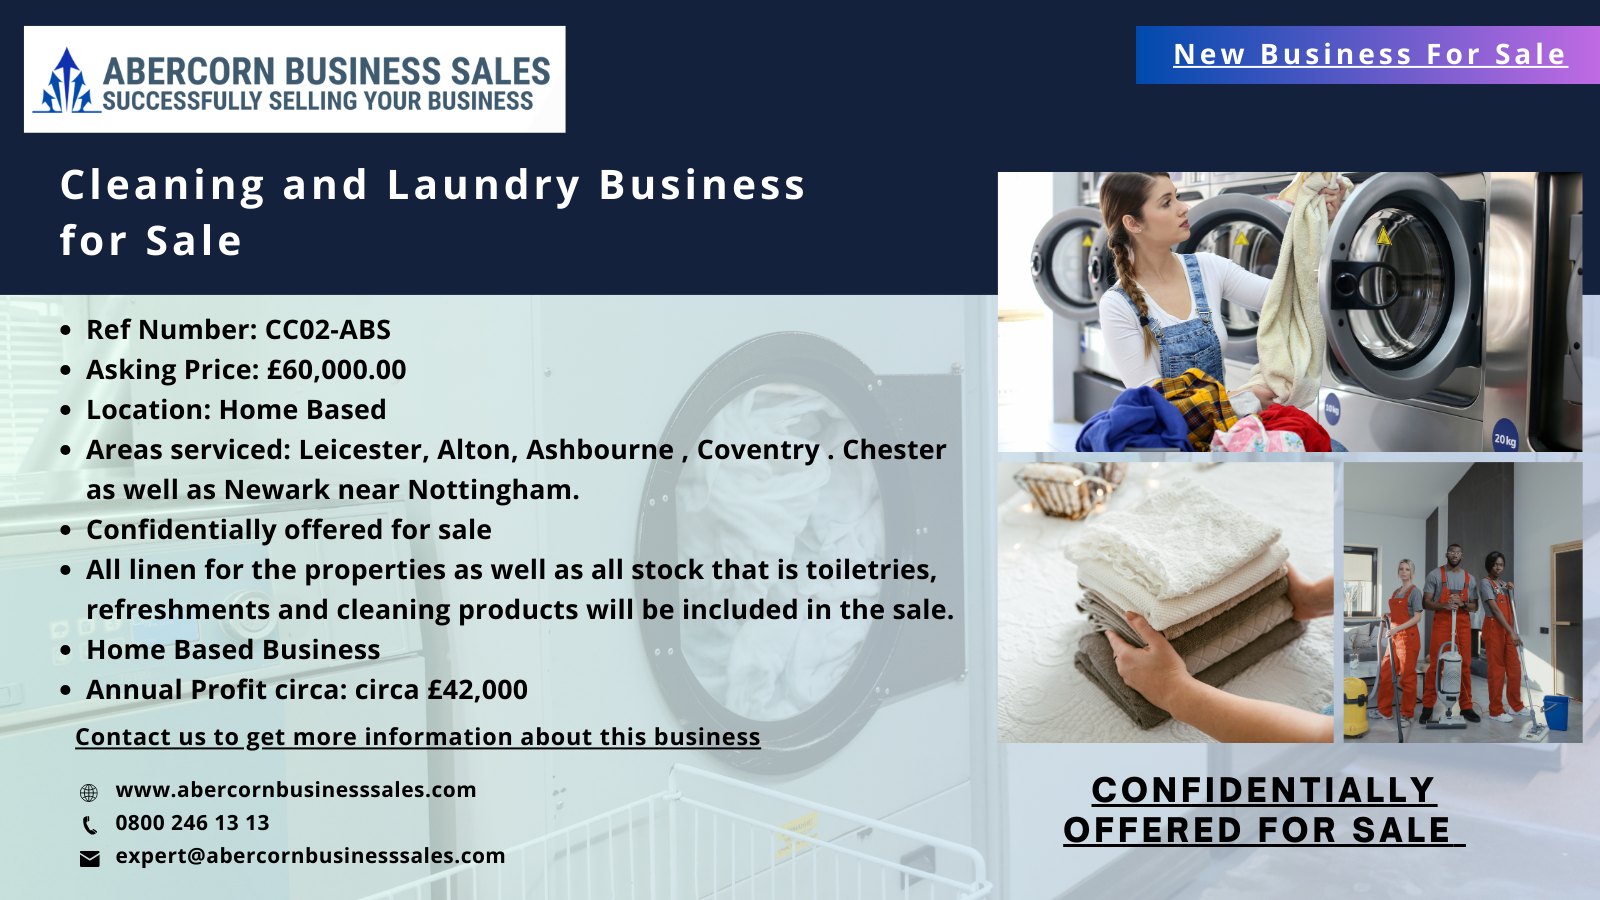 CC02-ABS - Cleaning and Laundry Business for Sale